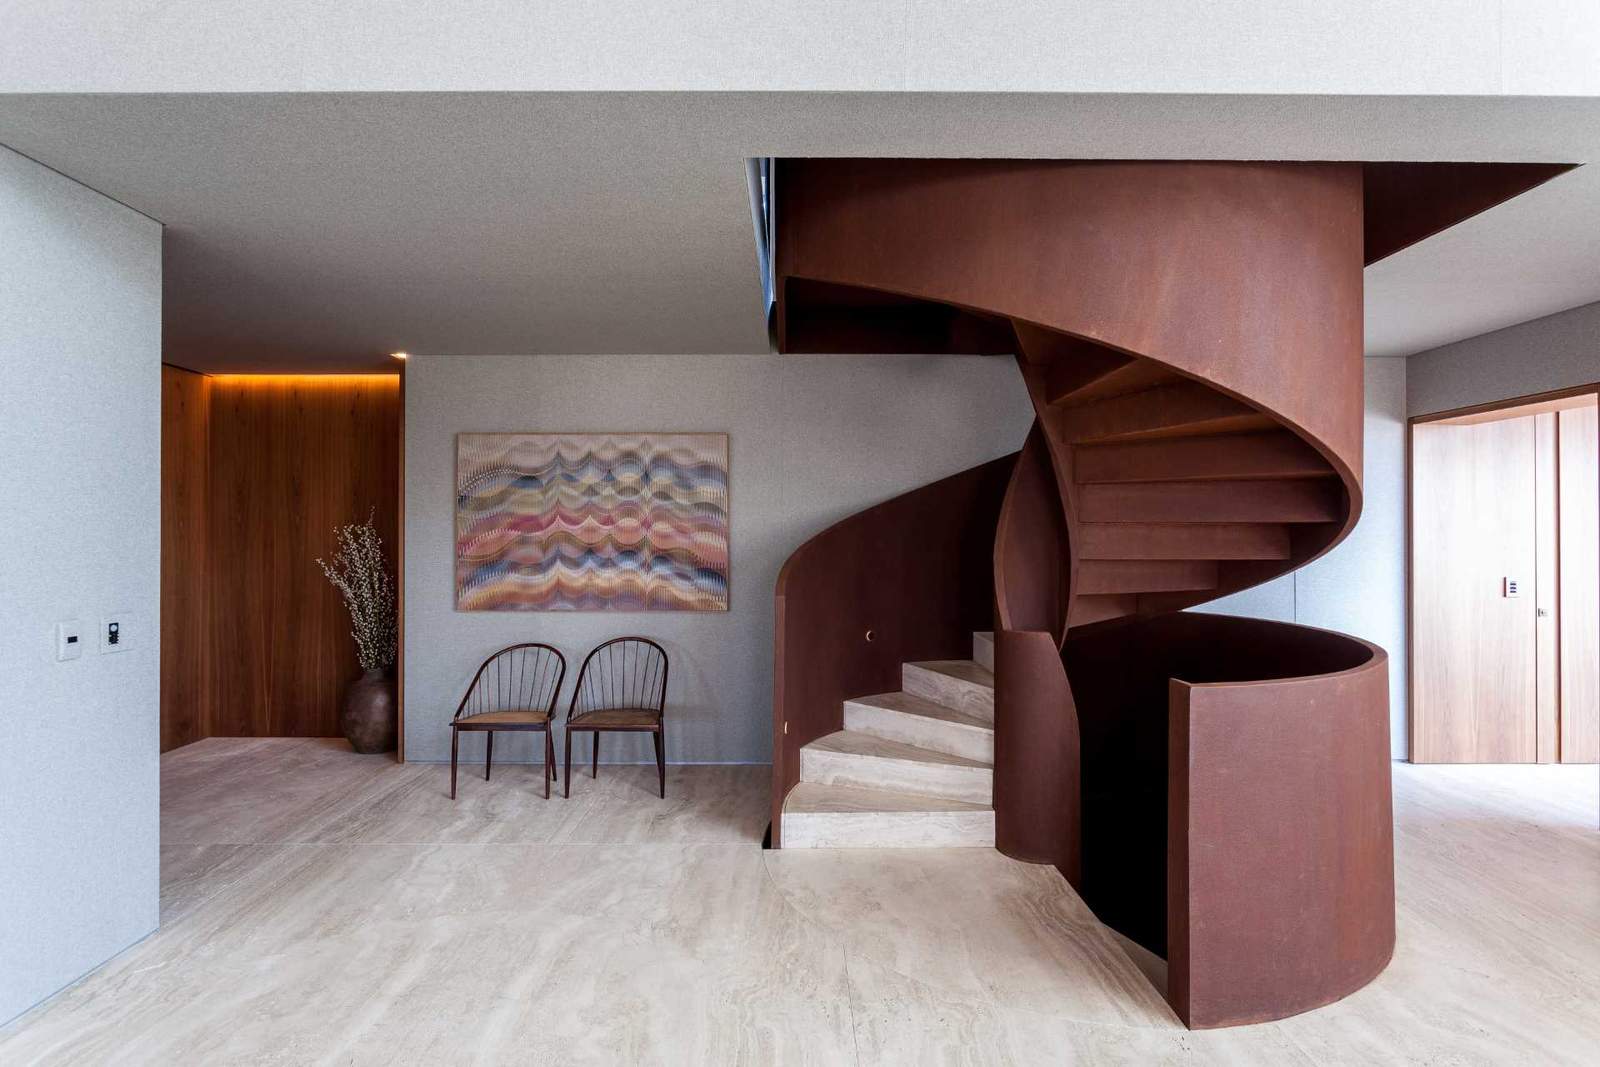 The spiral staircase, which stands out as a sculptural element in the interior, is made from Corten steel.